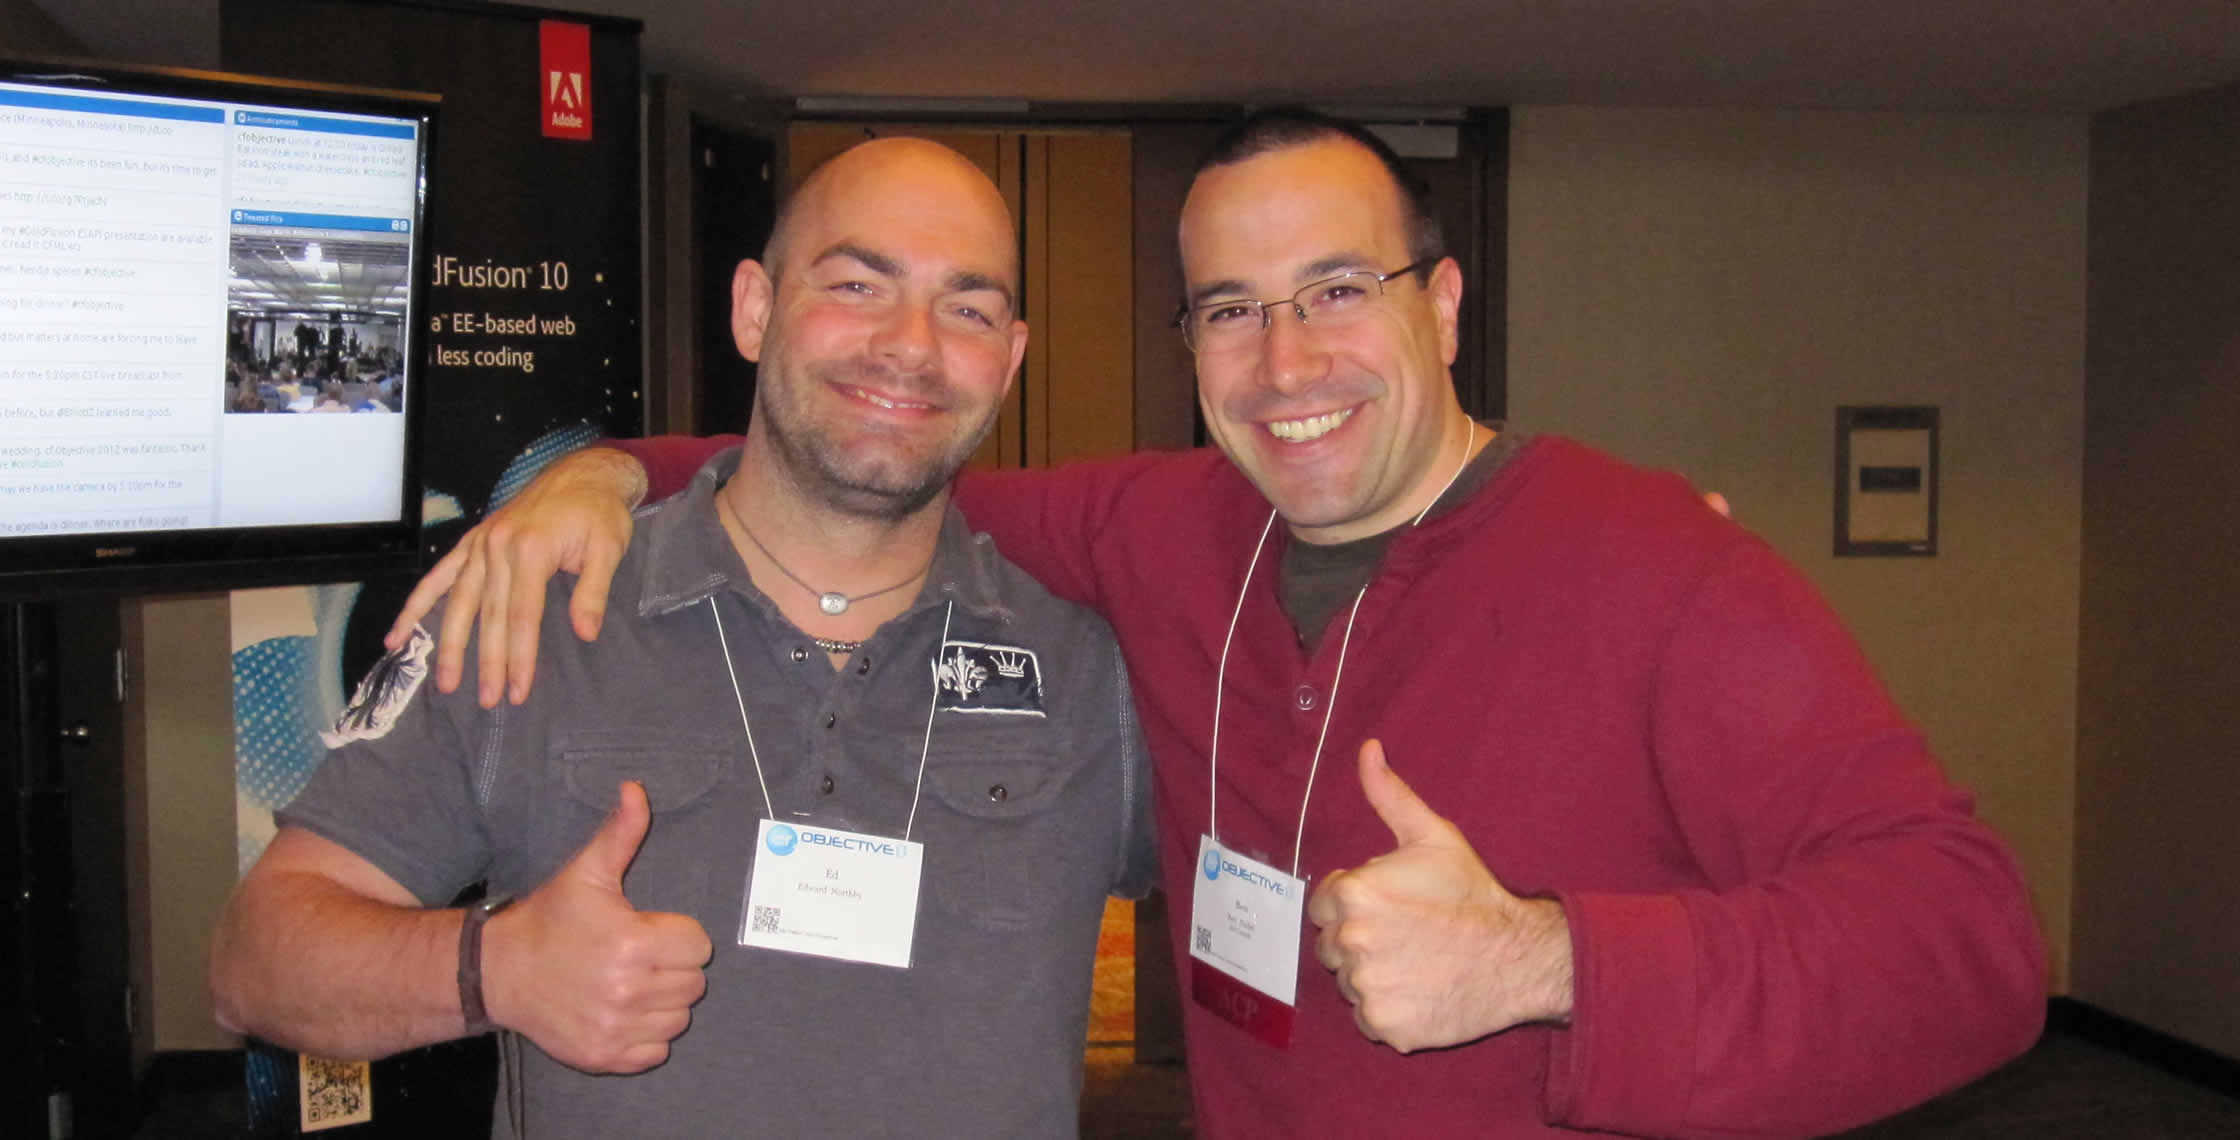 Ben Nadel at cf.Objective() 2012 (Minneapolis, MN) with: Ed Northby